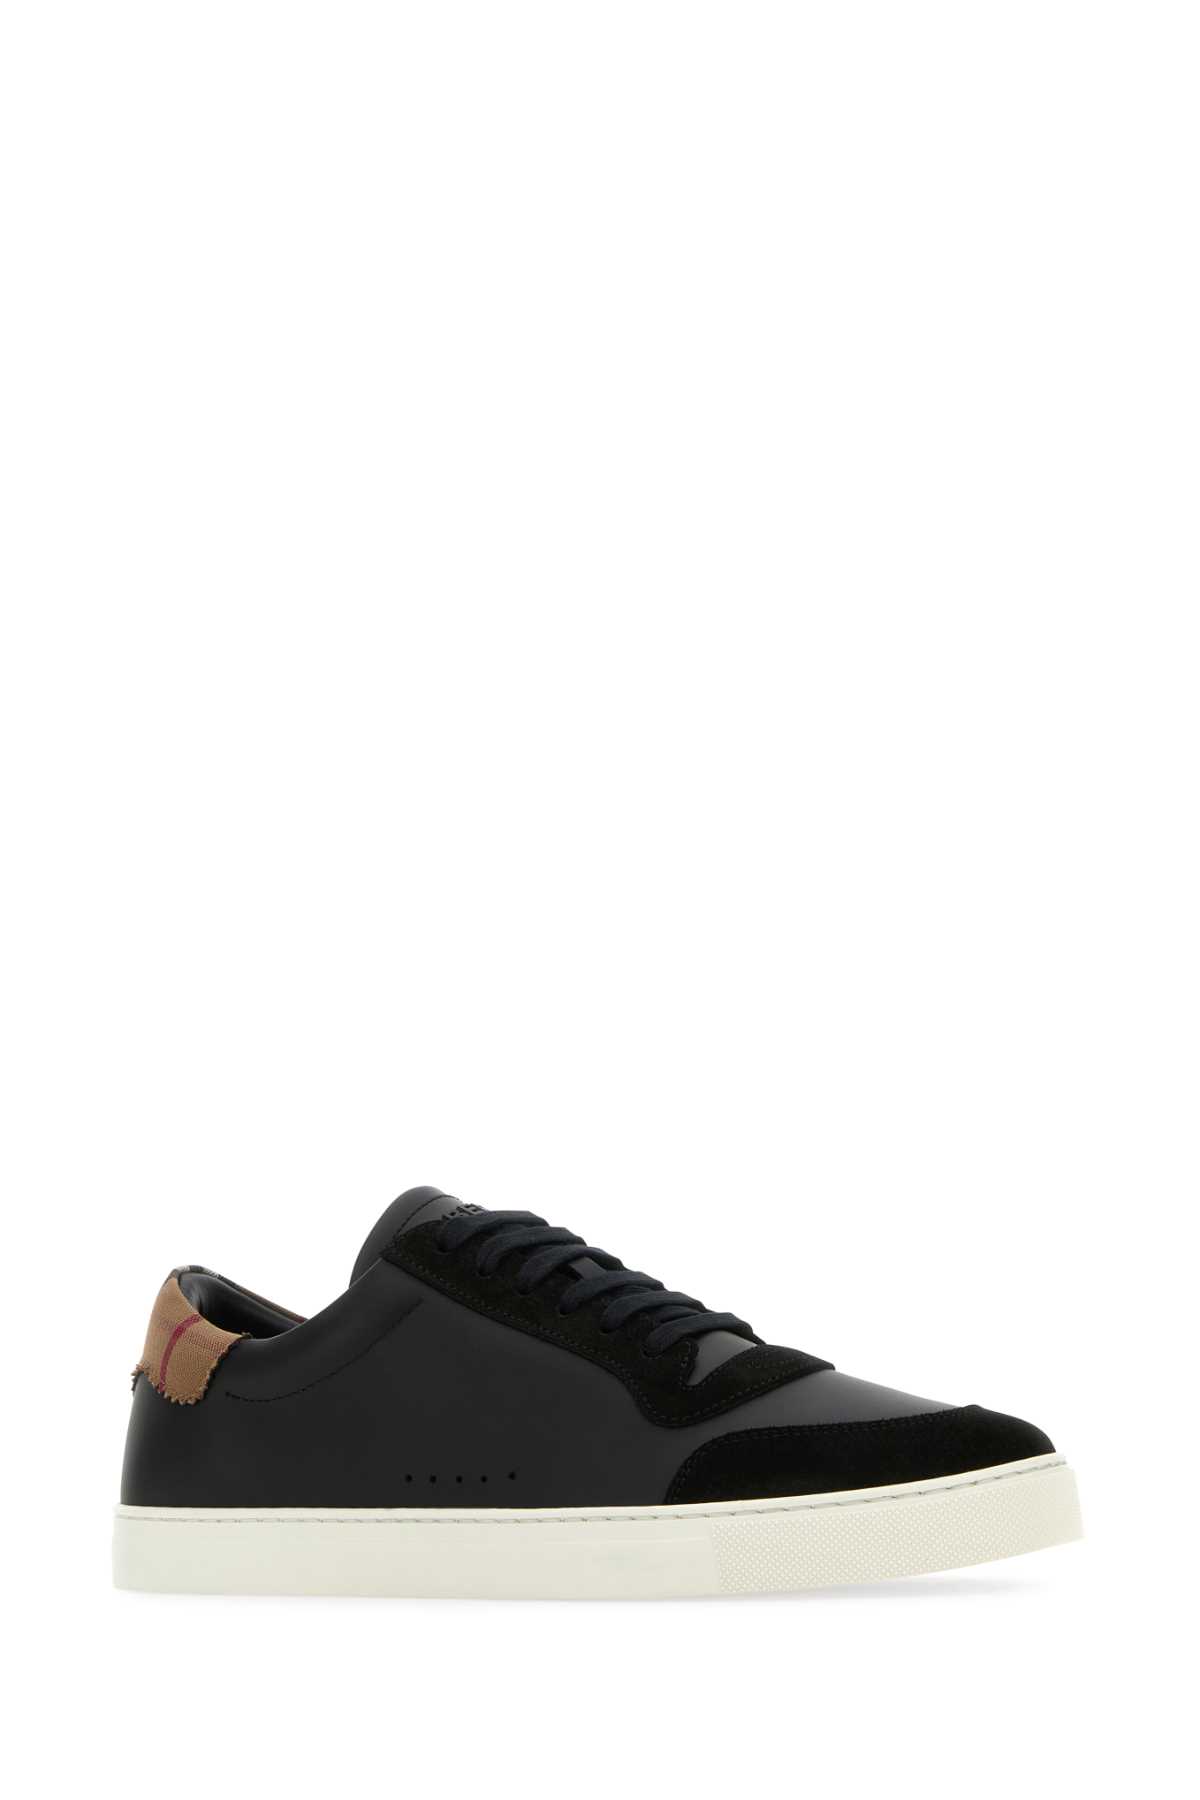 BURBERRY BLACK LEATHER SNEAKERS